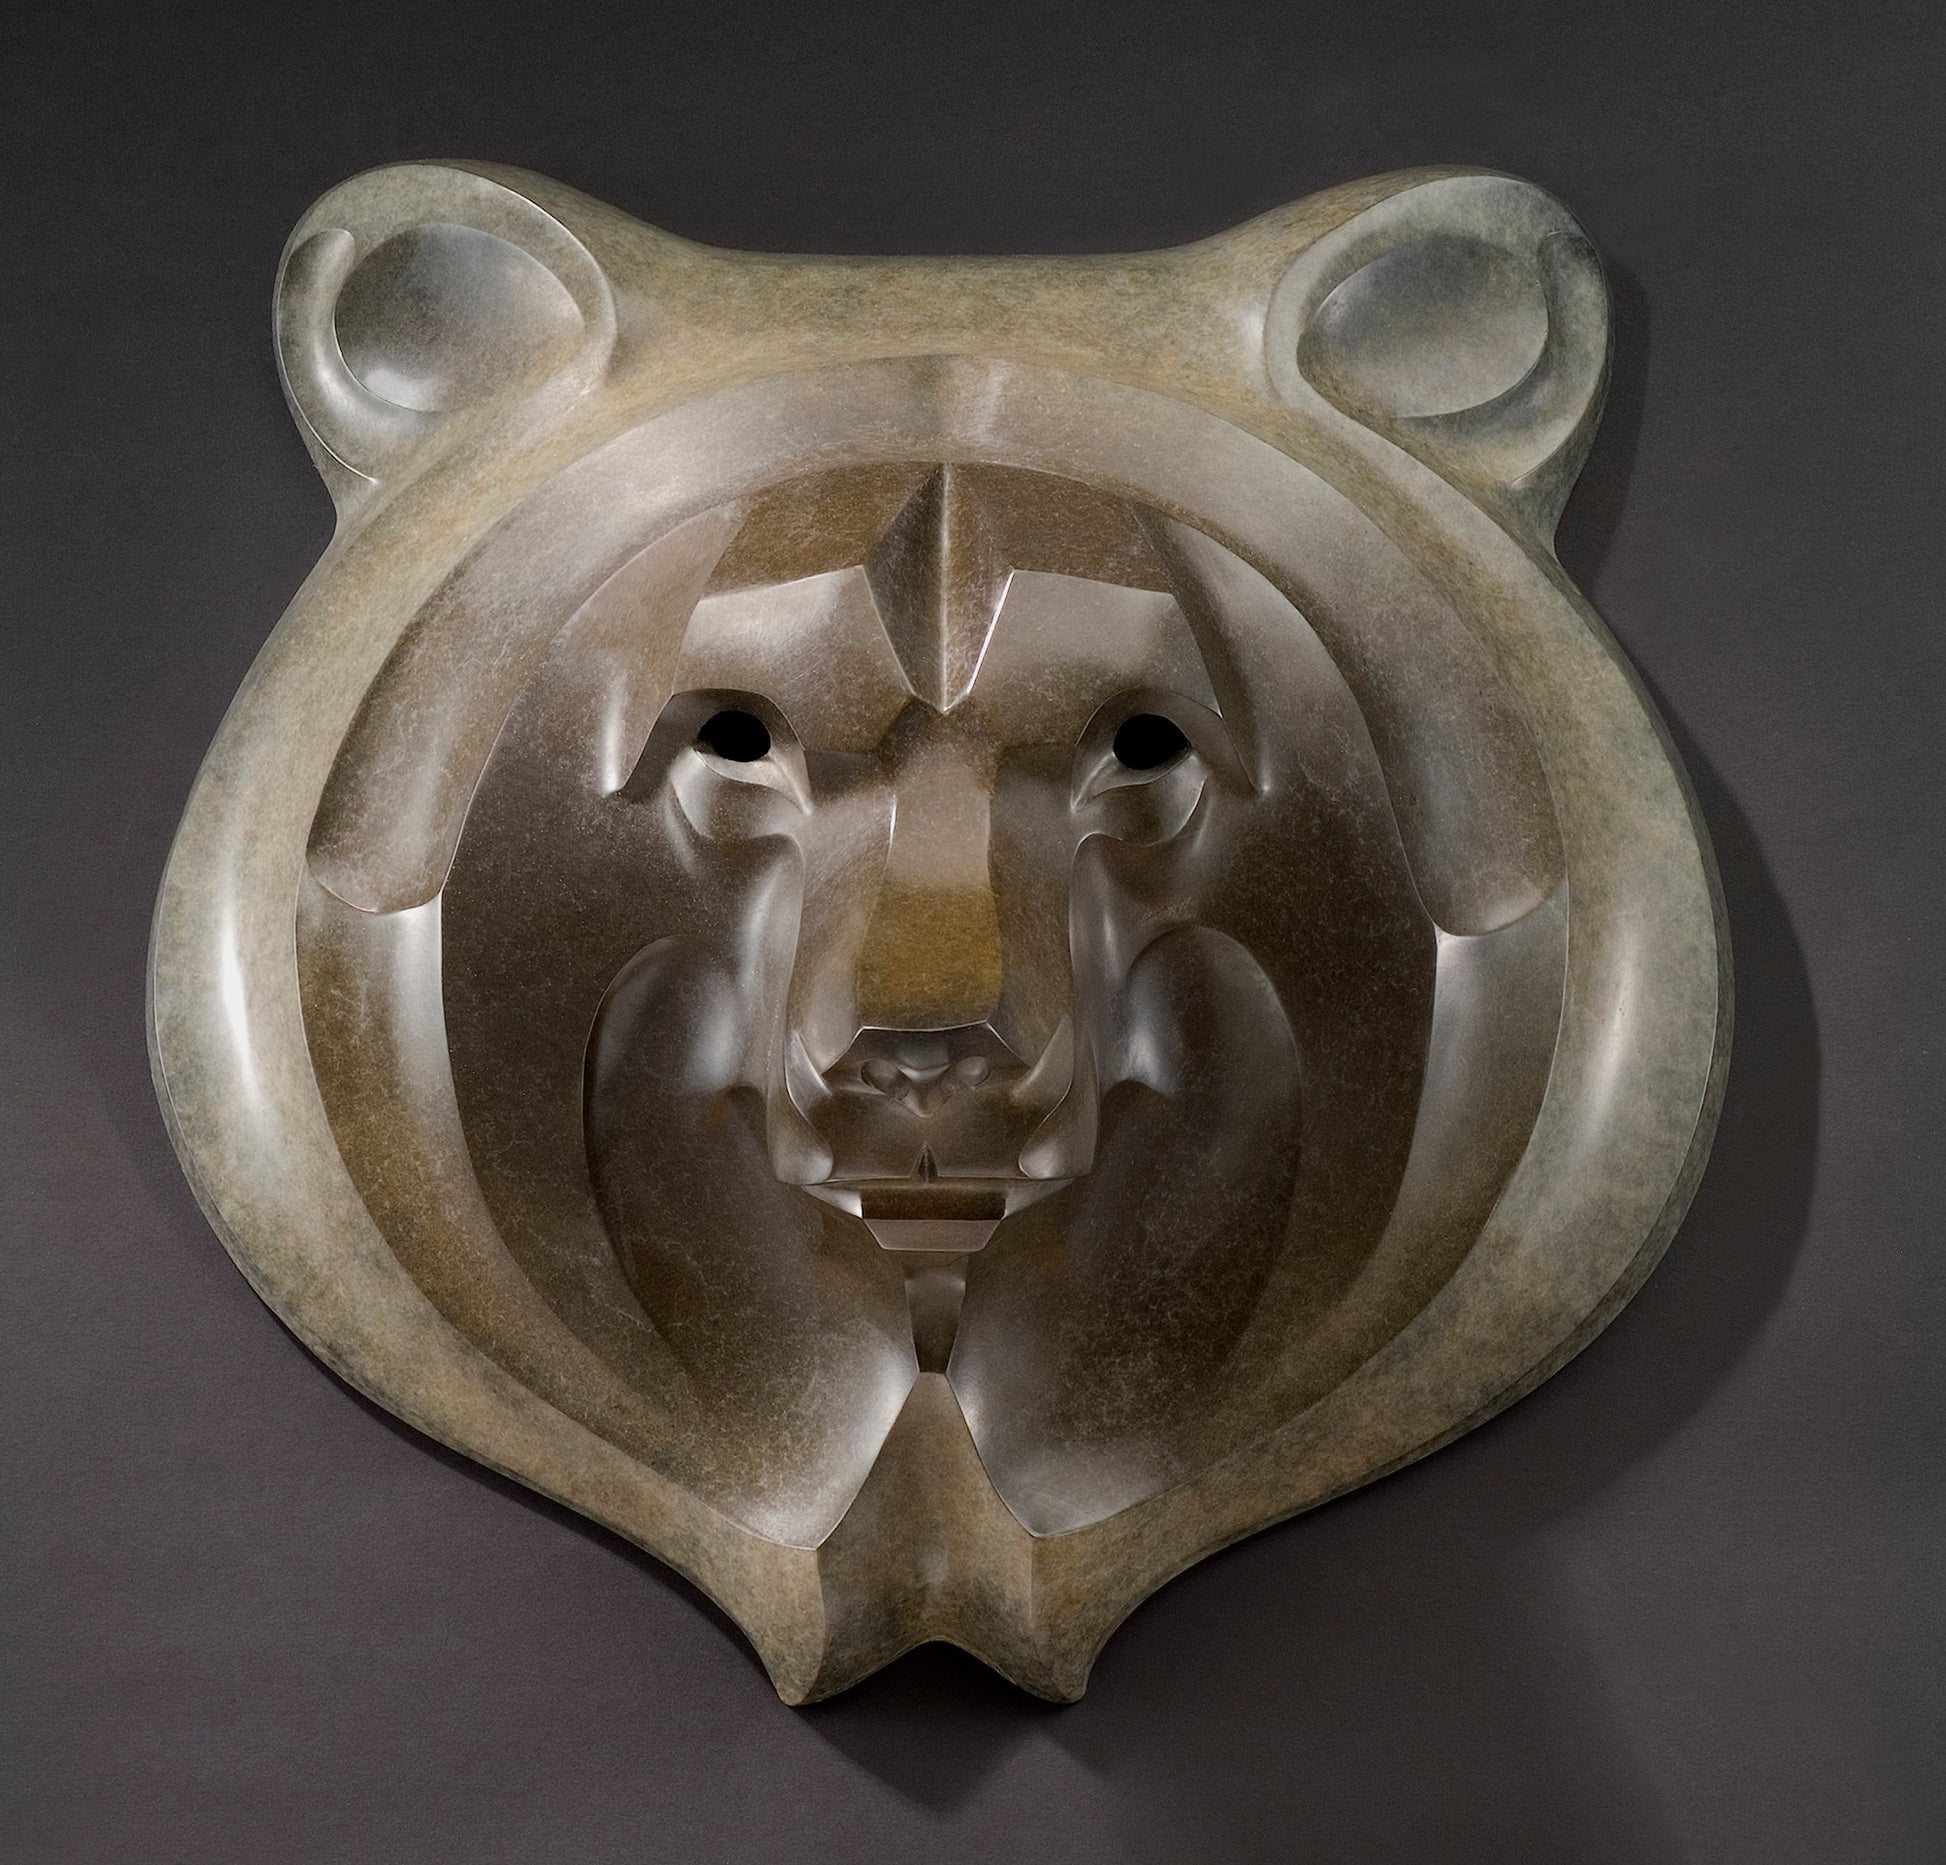 Grizzly Mask-Sculpture-Rosetta-Sorrel Sky Gallery